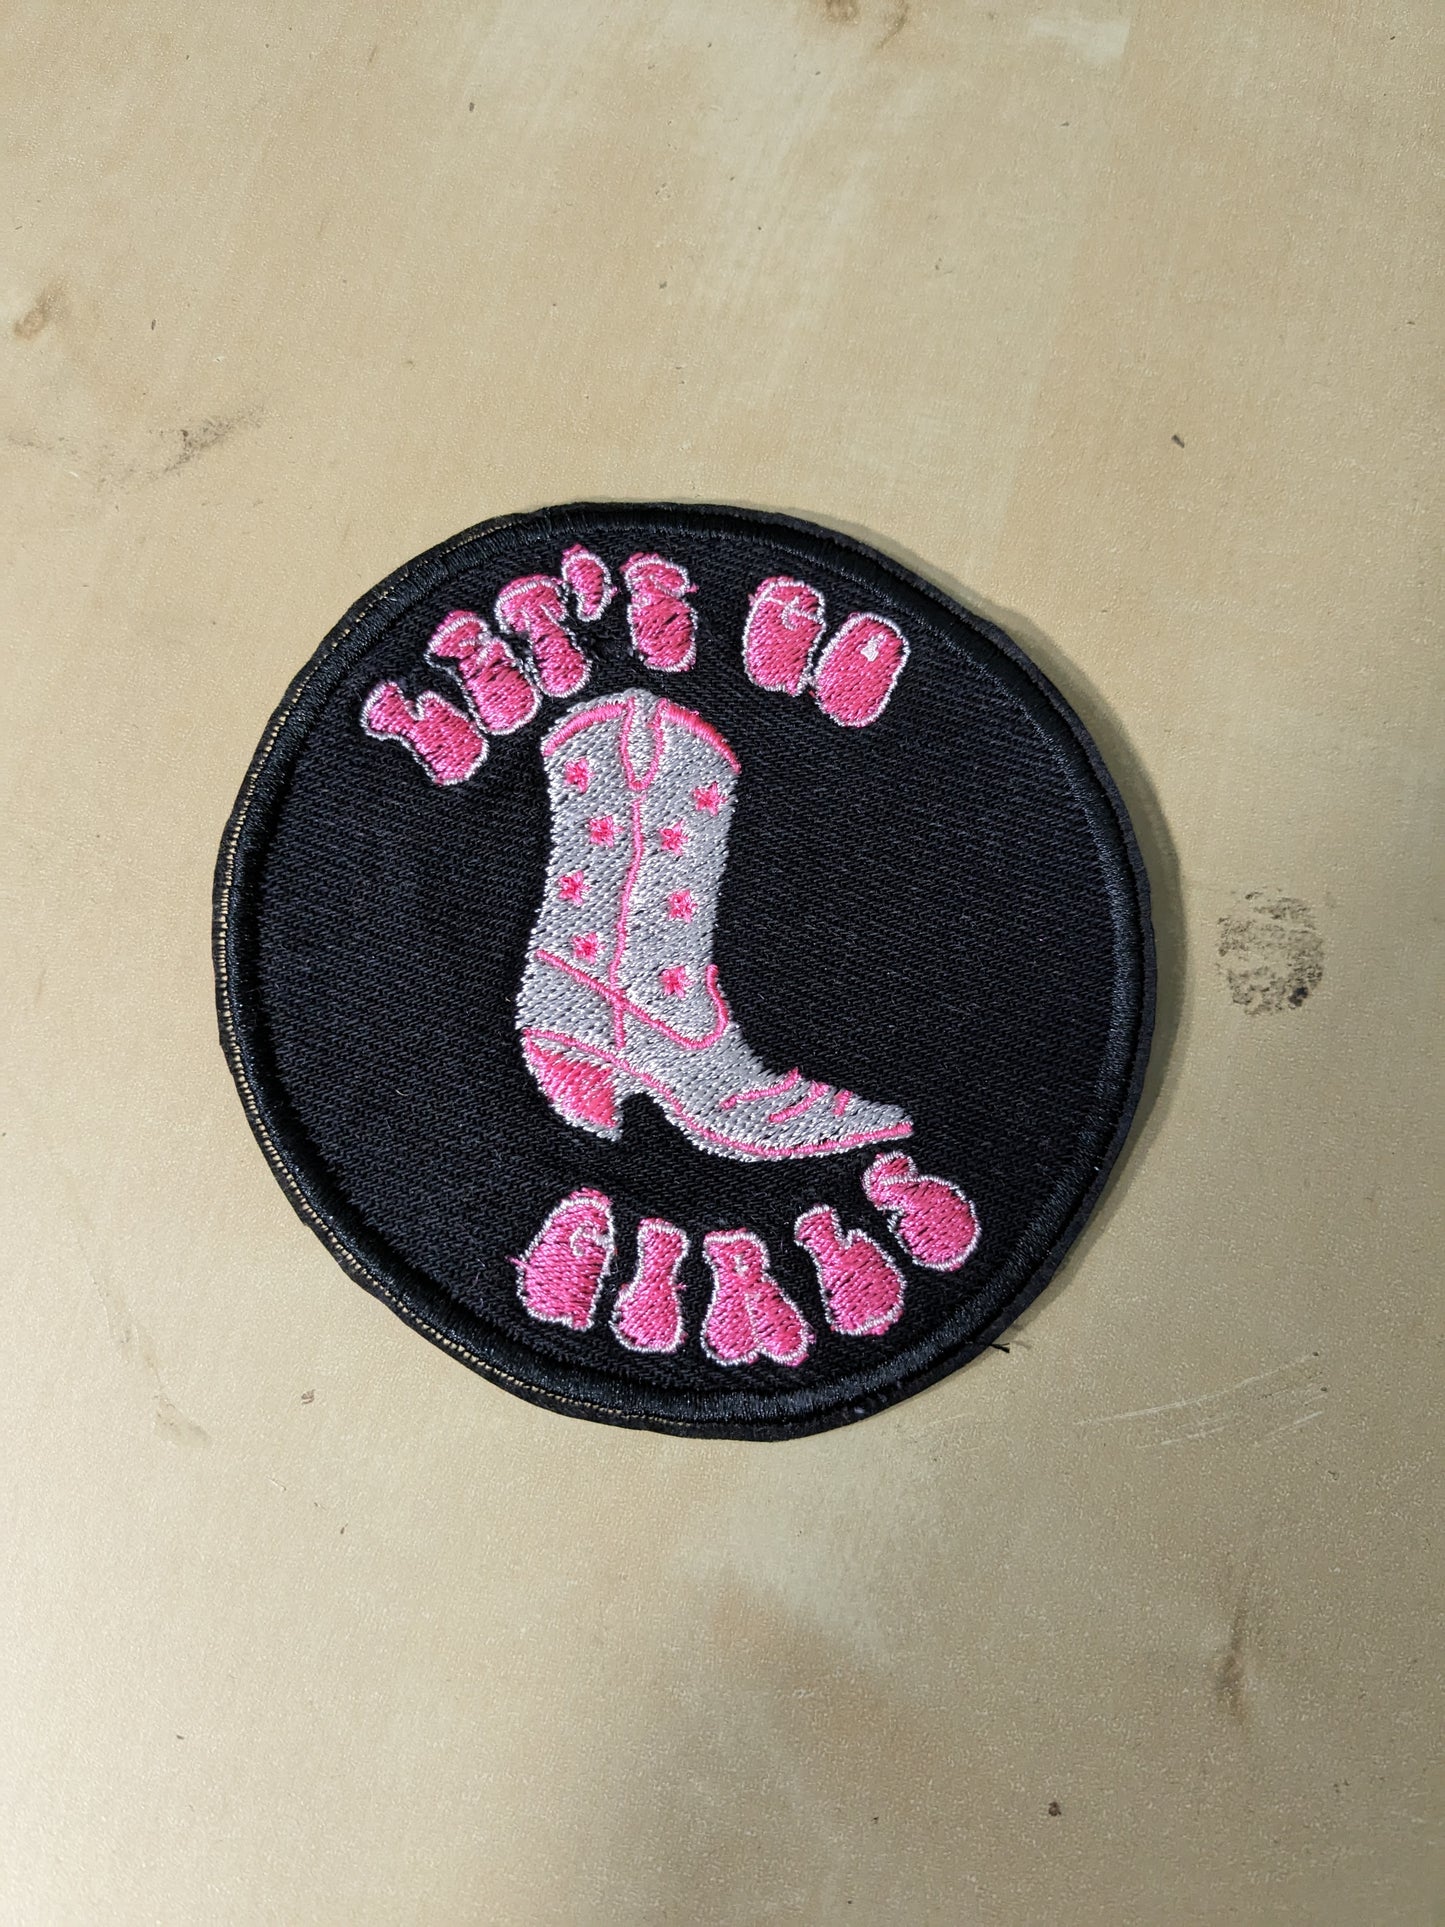 Let's Go Girls - Cowgirl Western Inspired Recycled Denim Sew On Patch - Classic Black and Pink with Cowboy Boot Detail